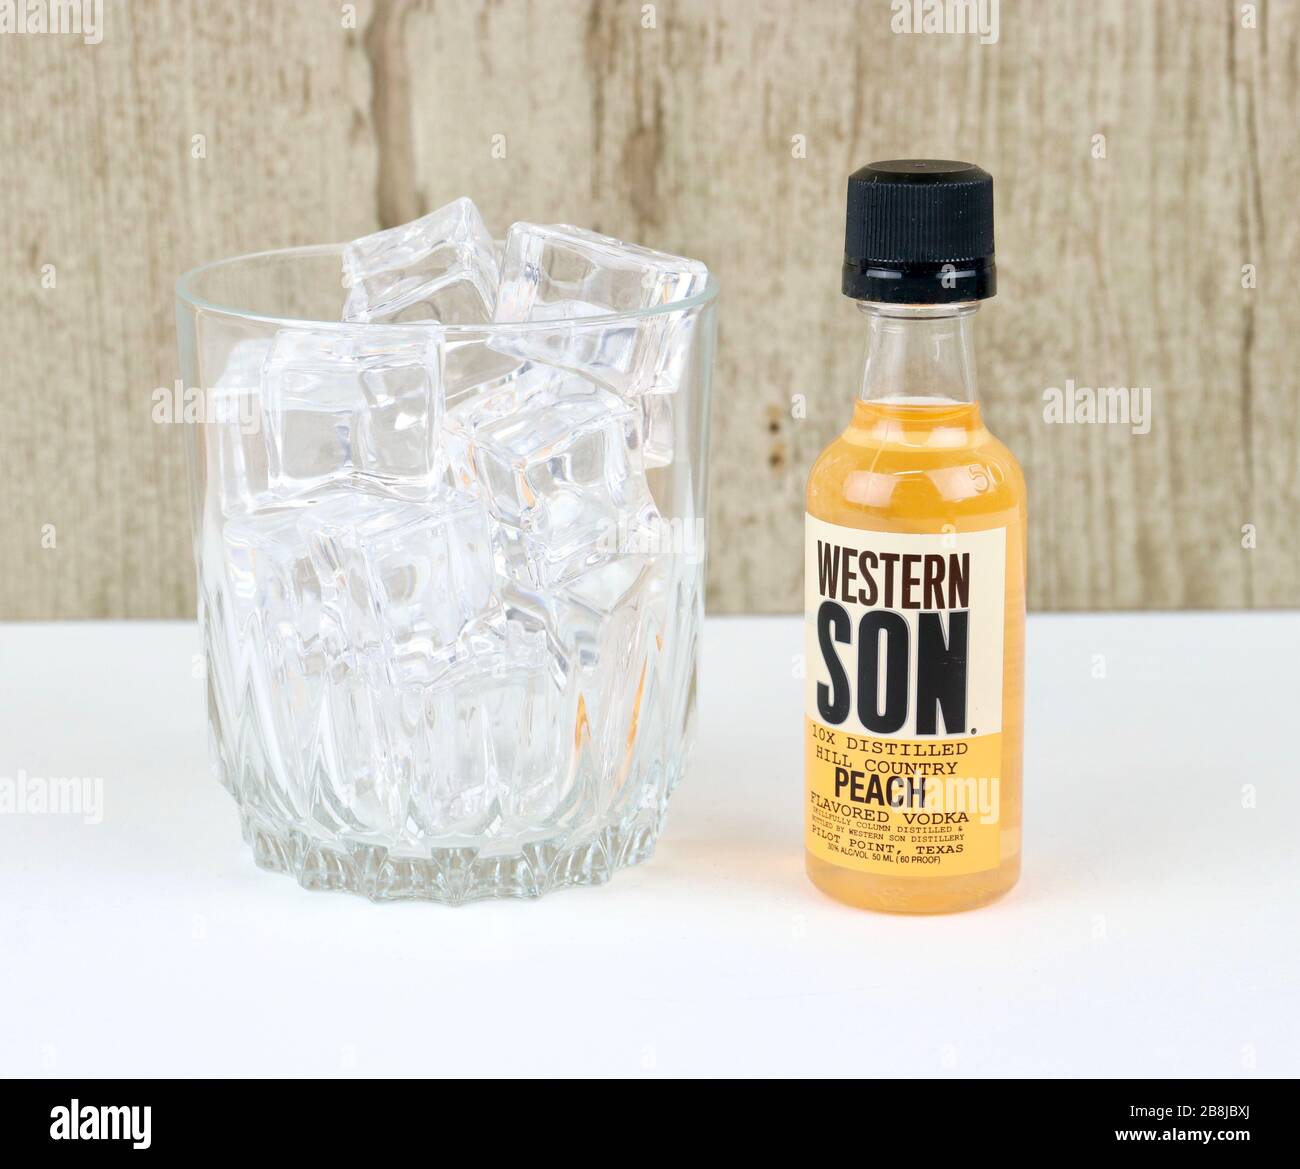 Spencer, Wisconsin, U.S.A. , March, 22, 2020   Bottle of Western Son Peach Vodka   Western Son is made in Texas, U.S.A. Stock Photo